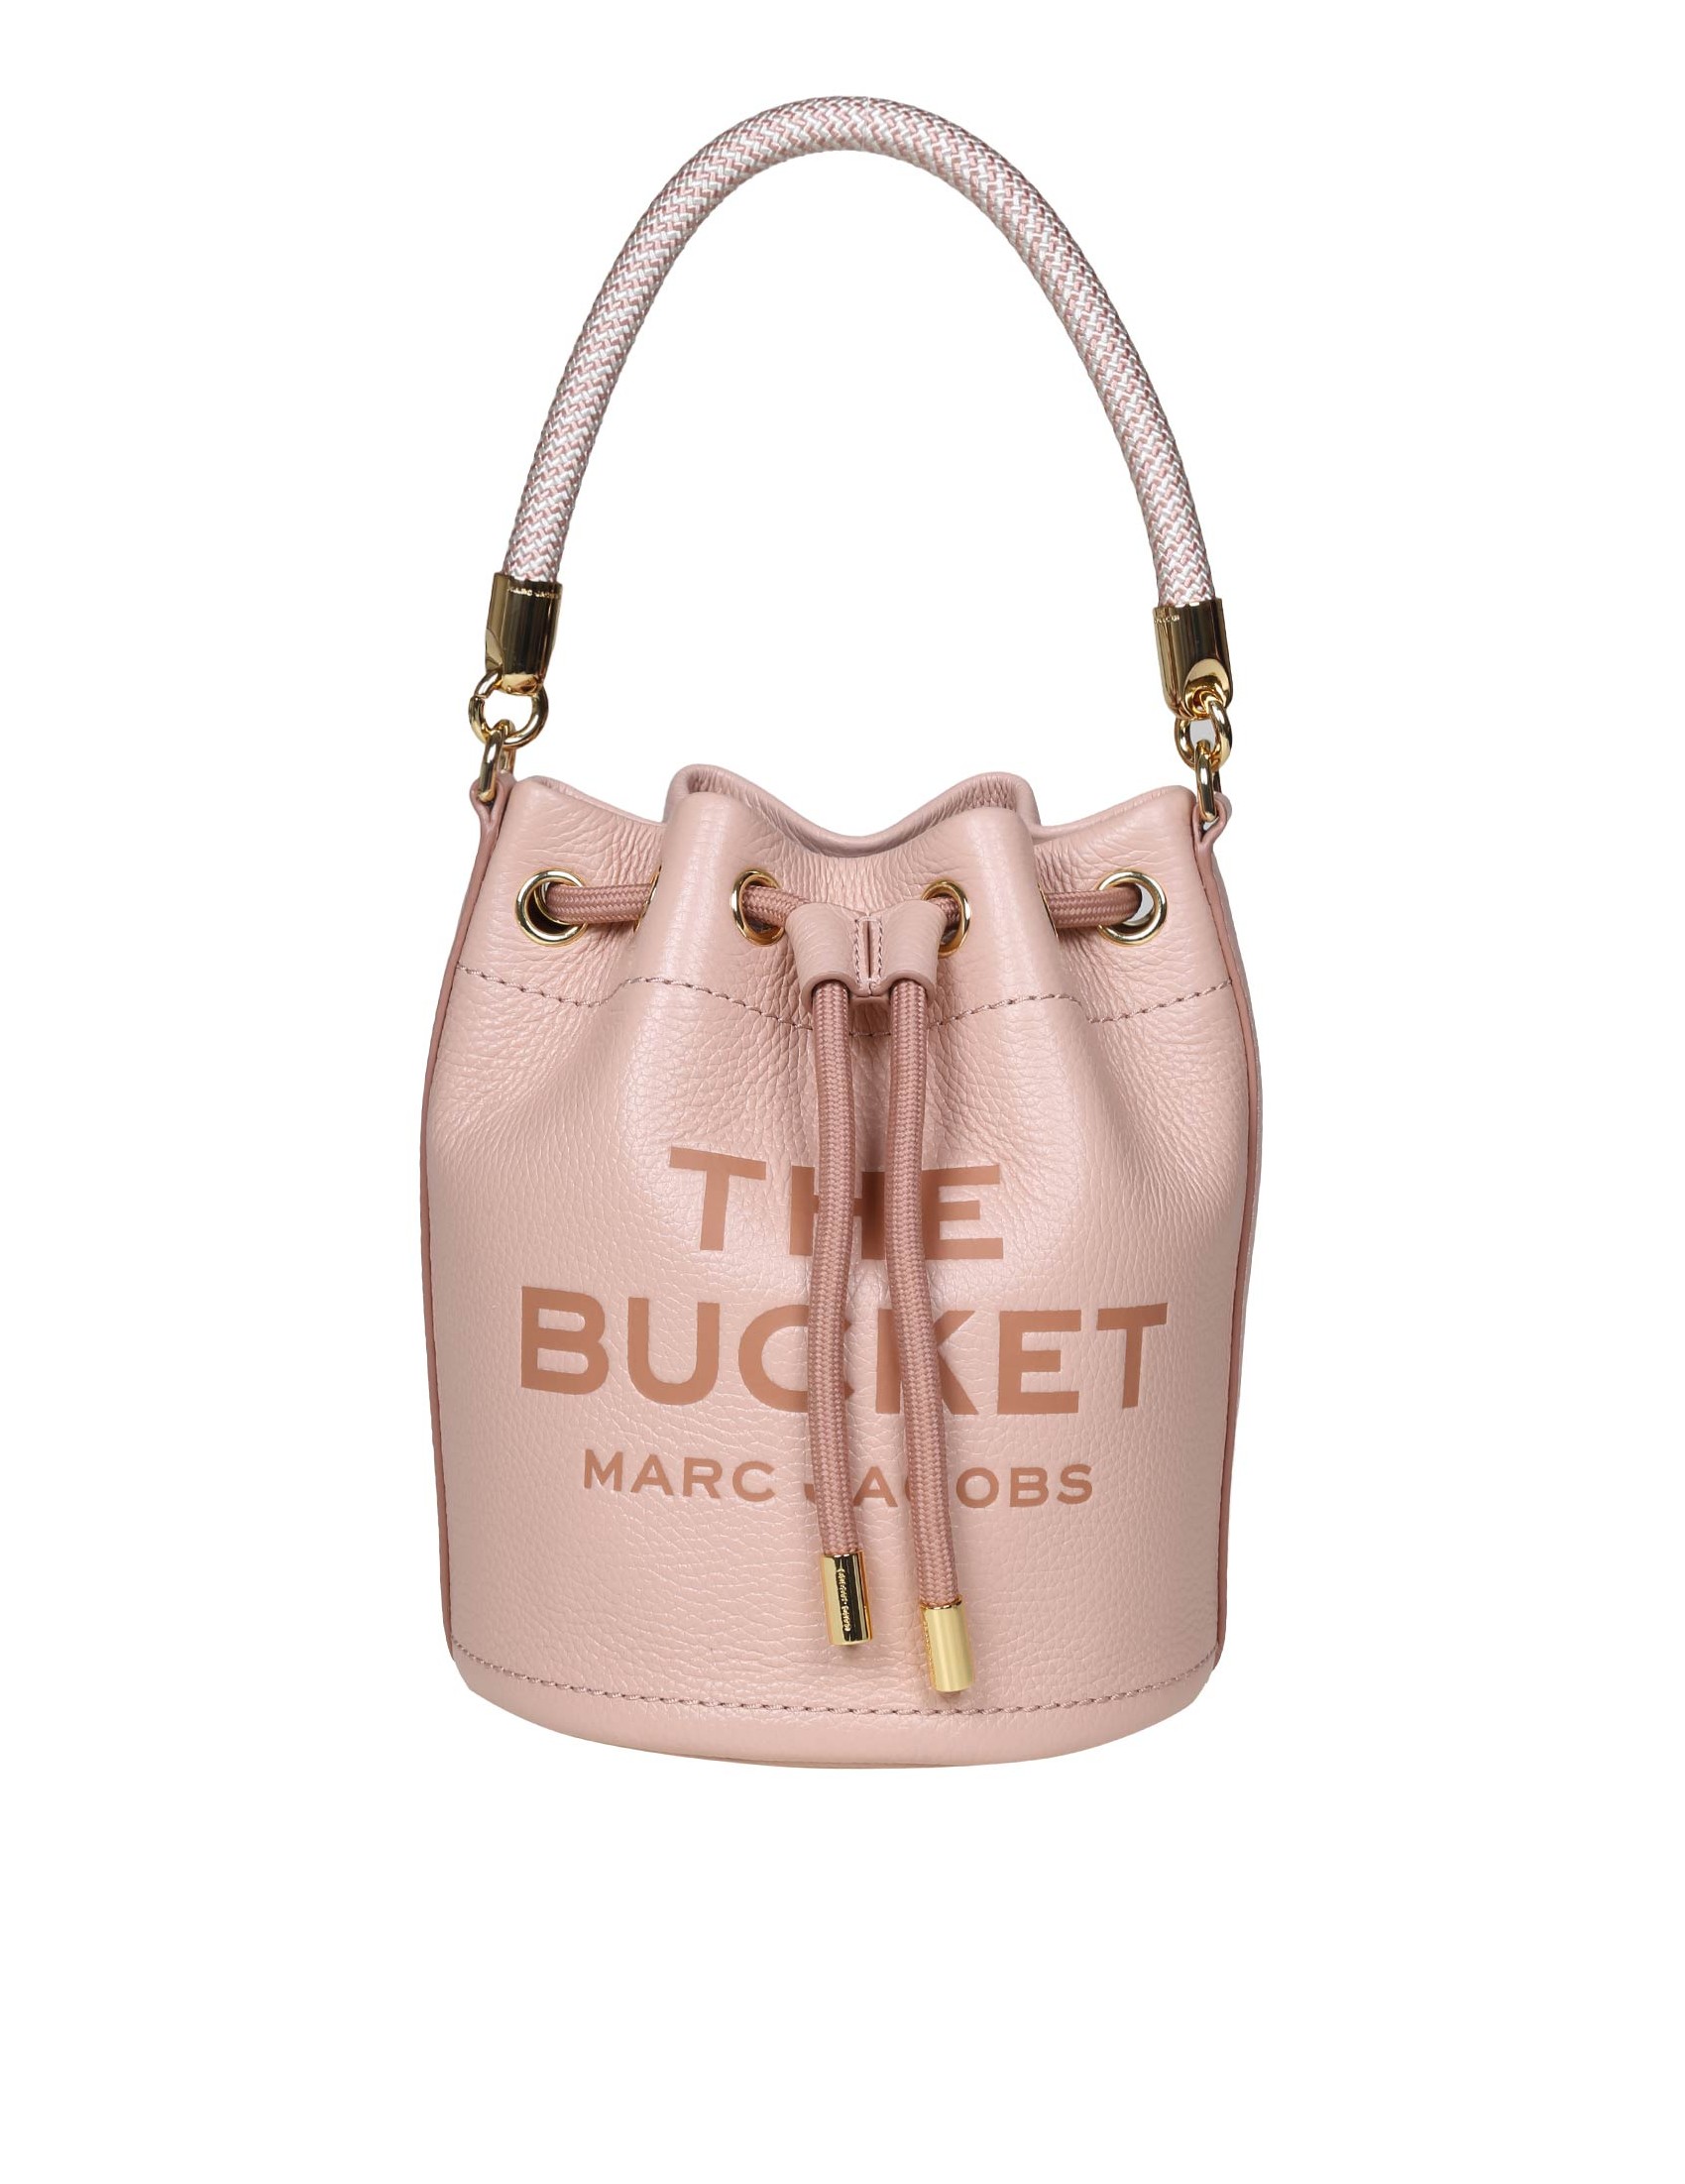 MARC JACOBS THE BUCKET PINK LEATHER WOMEN'S BAG